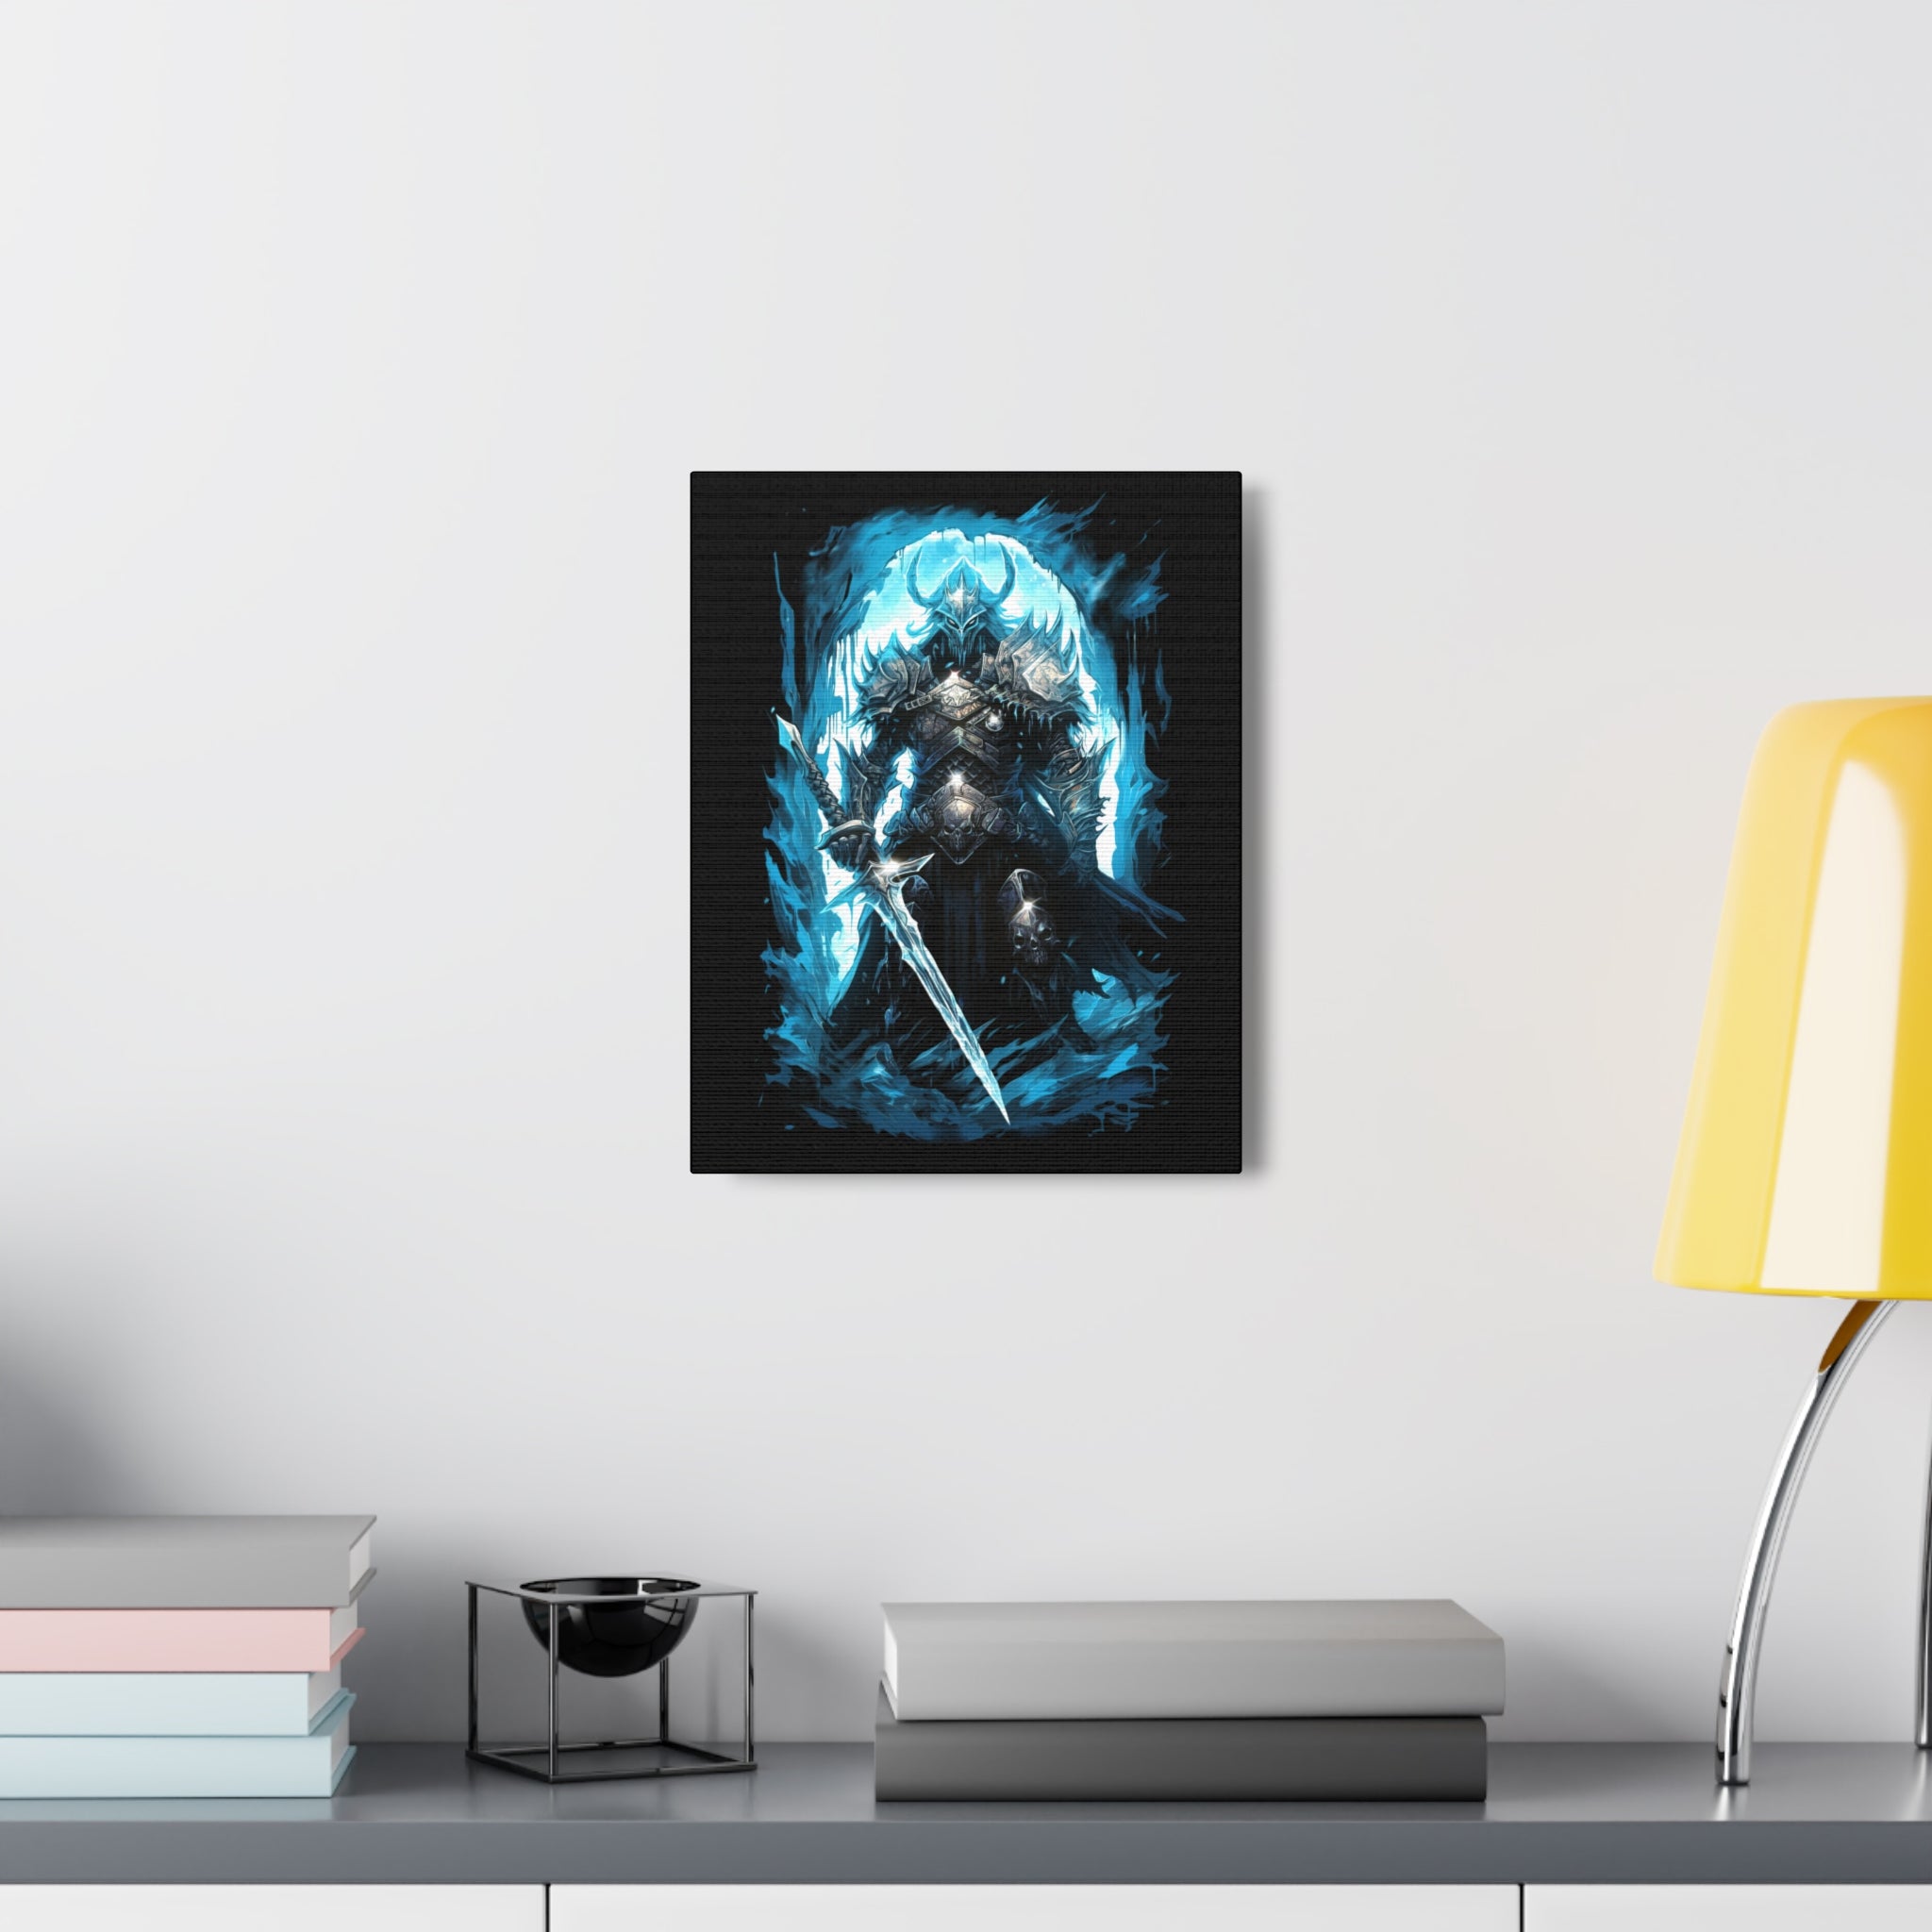 PALADIN CLASS CANVAS GALLERY WRAPS